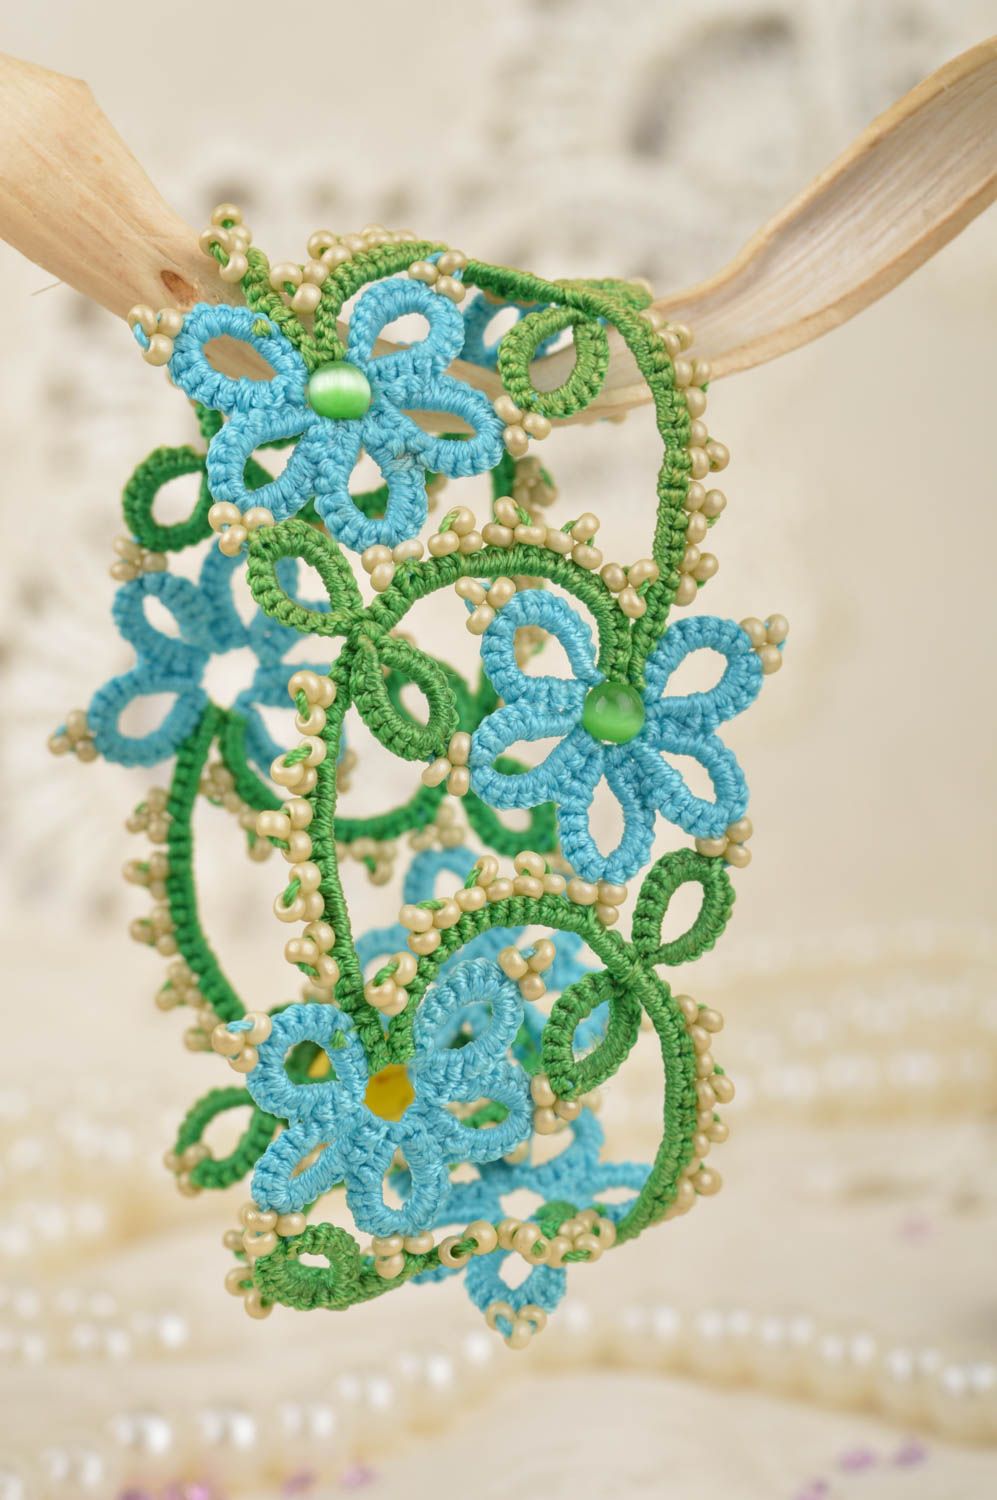 Gree and blue handmade designer woven lace bracelet with beads tatting technique photo 3